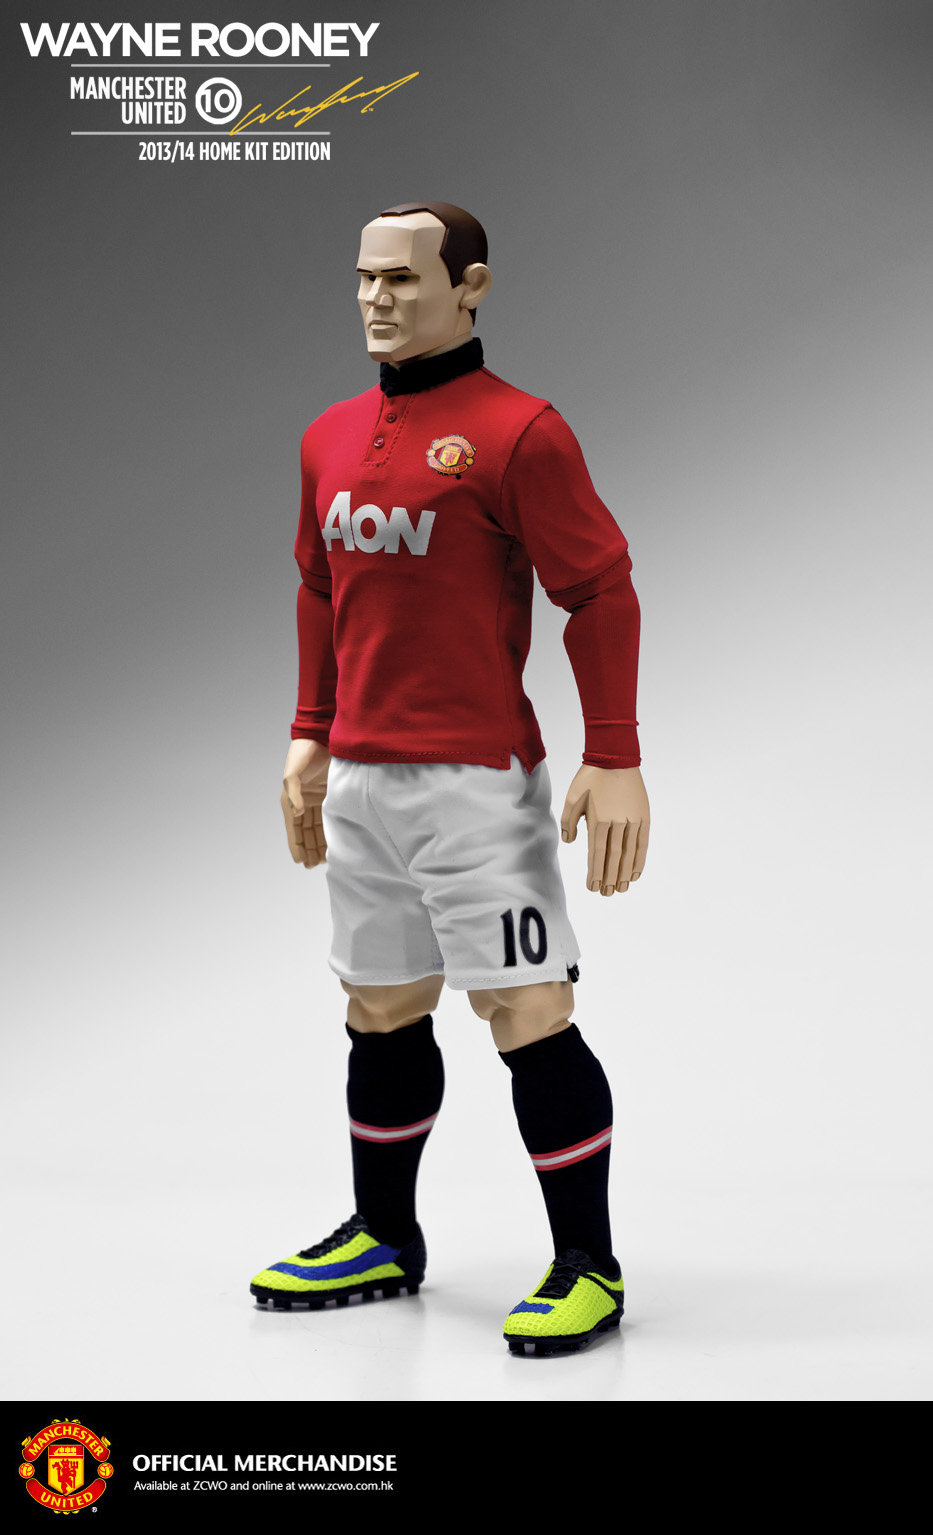 IMINIME/ZC WORLD - MANCHESTER UNITED - Page 3 Vqsc